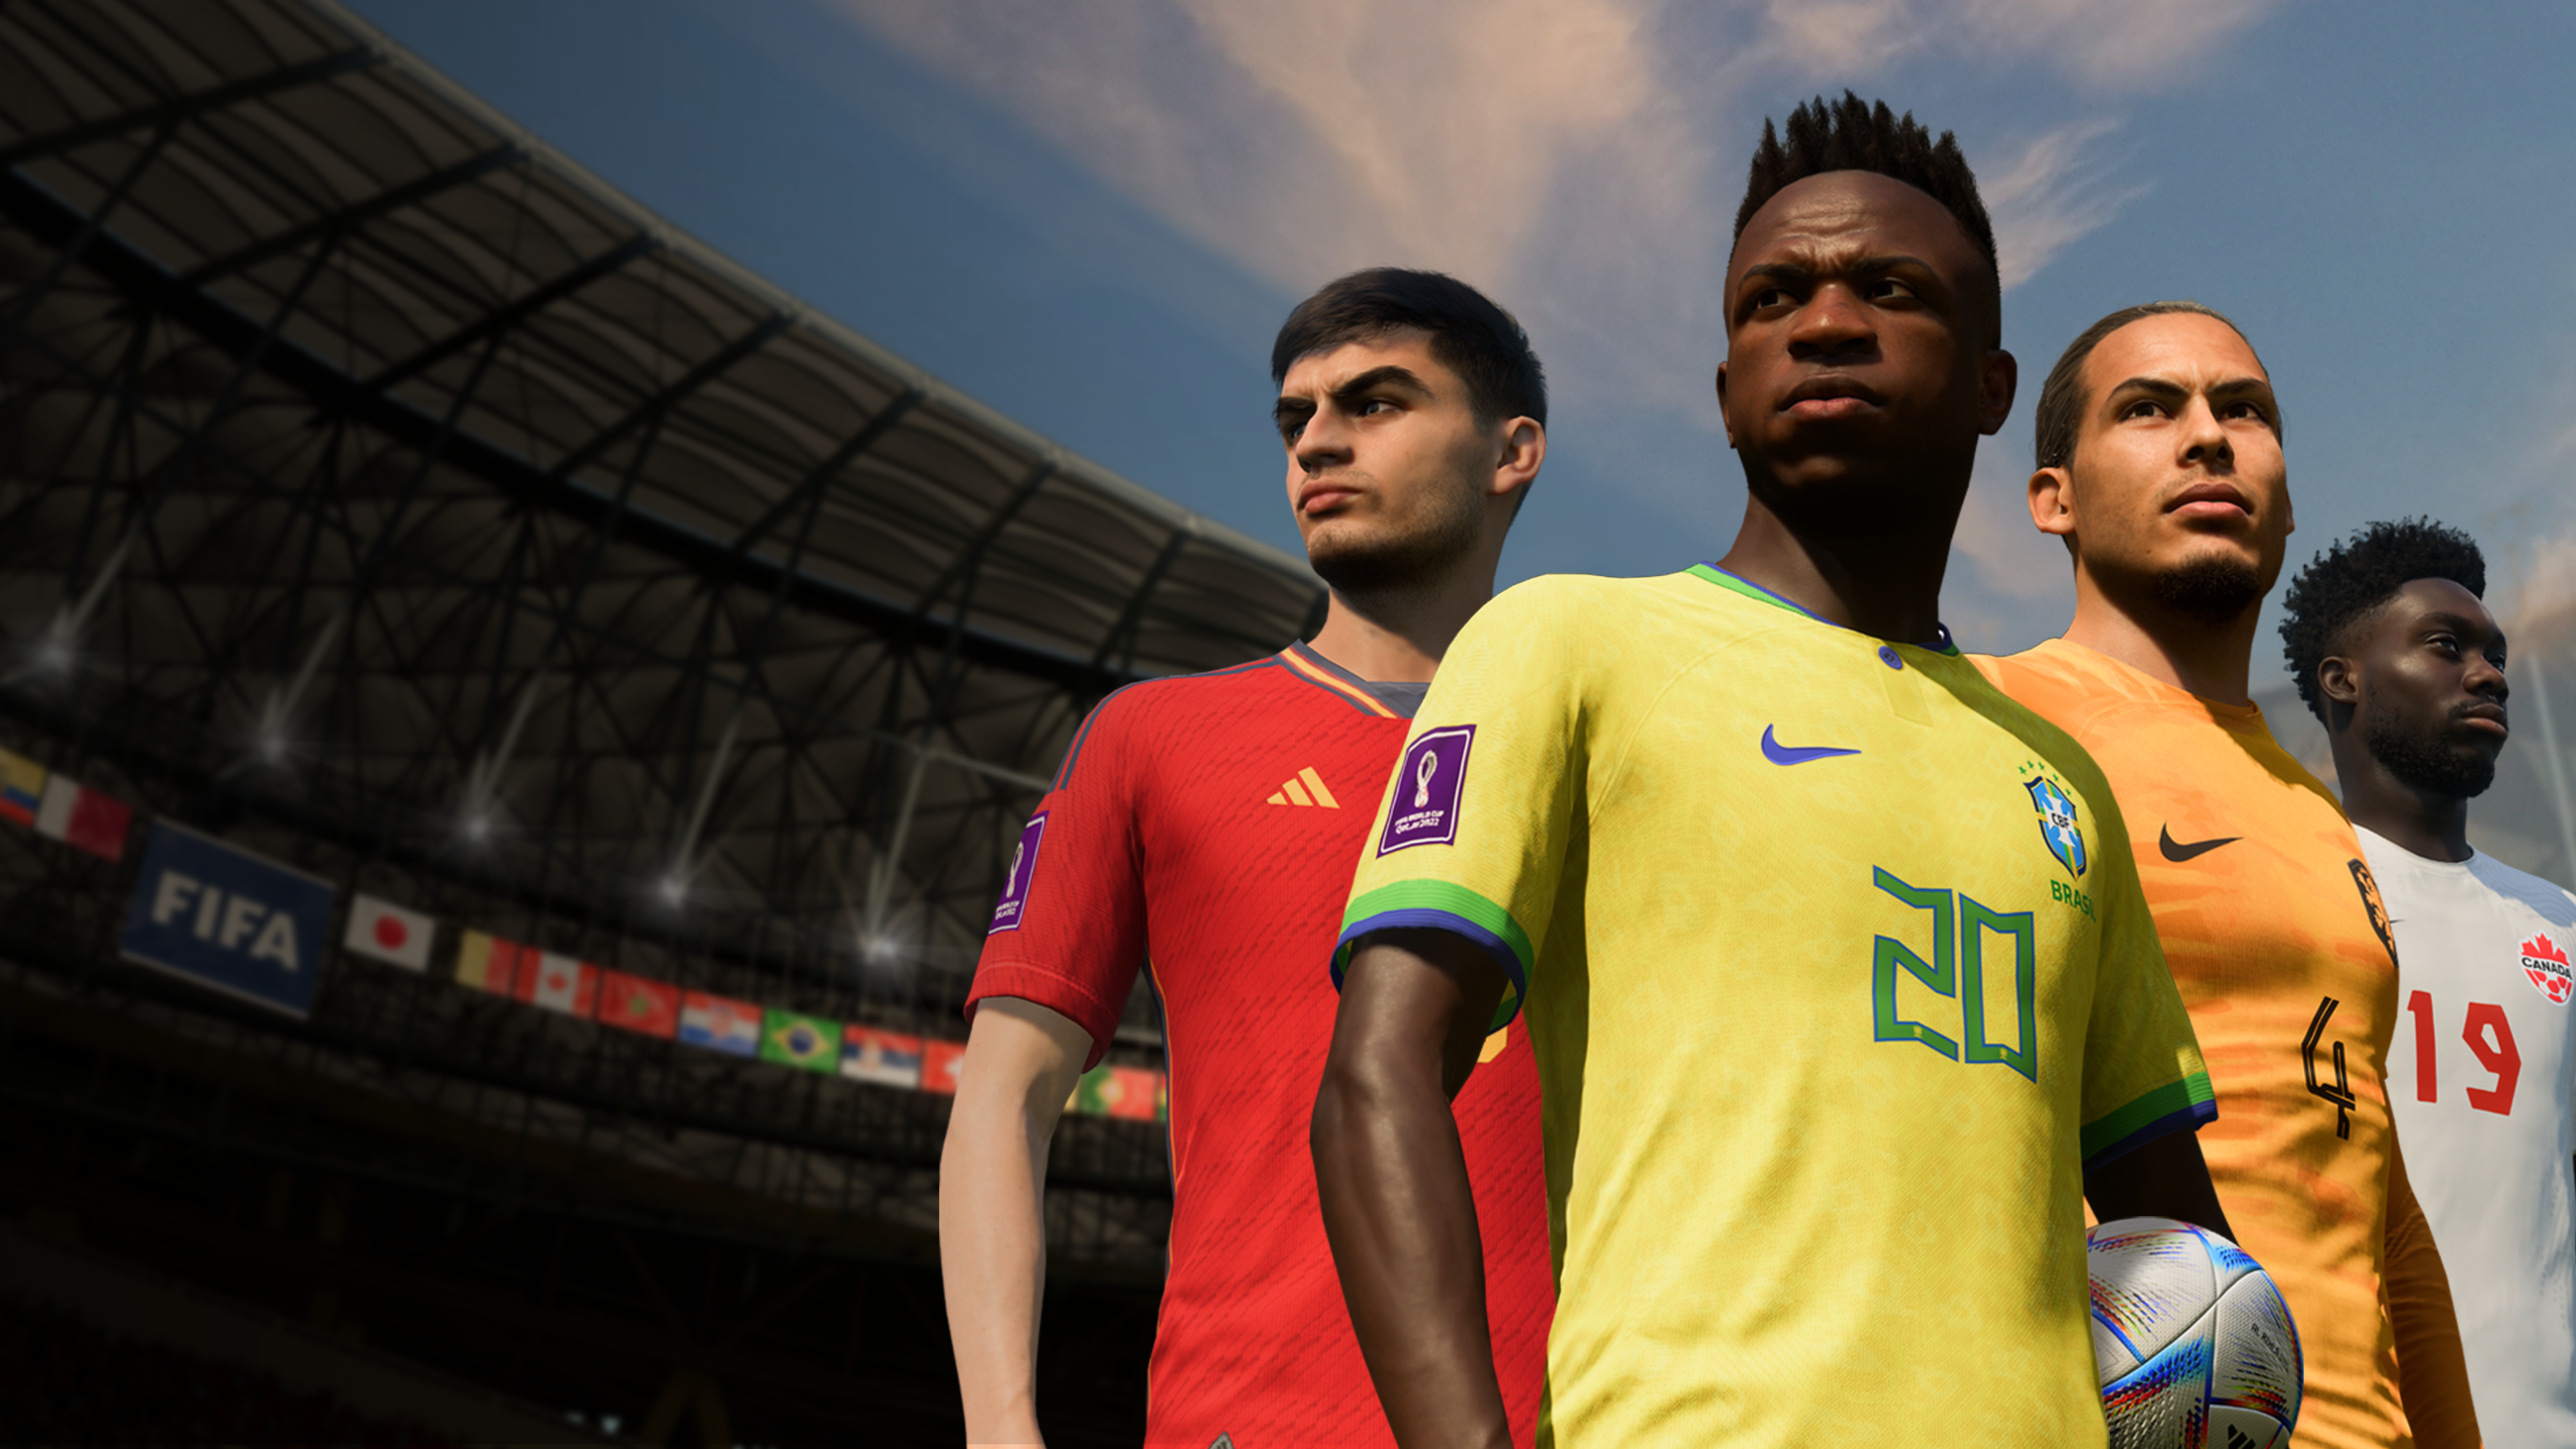 FIFA 23 World Cup update